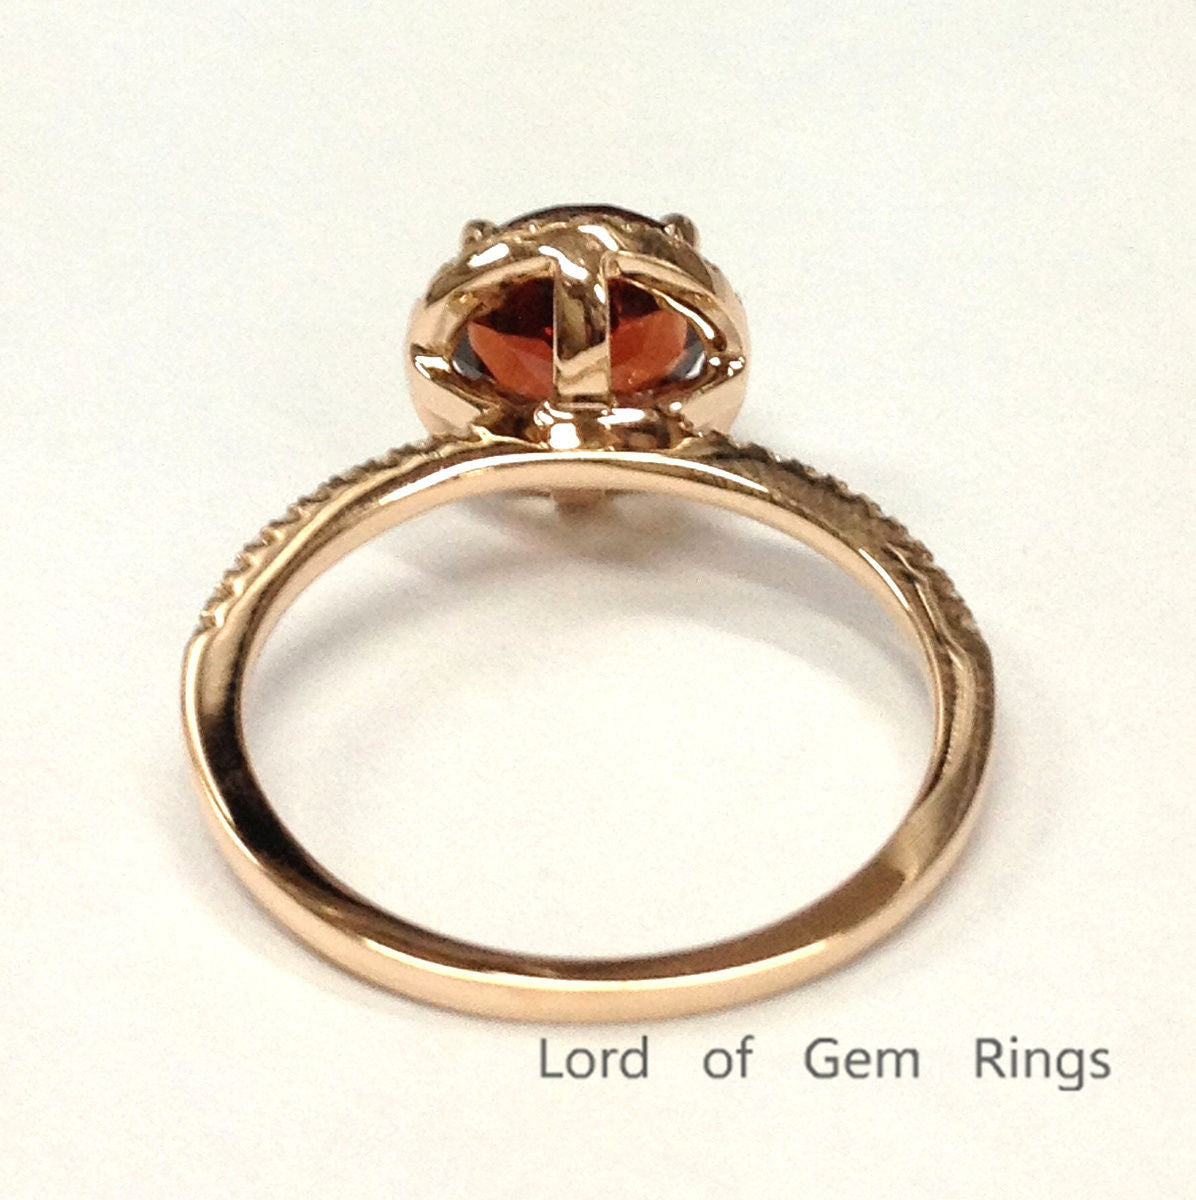 Round Garnet Engagement Ring Pave Diamond Wedding 14K Rose Gold 7mm Claw Prongs - Lord of Gem Rings - 3